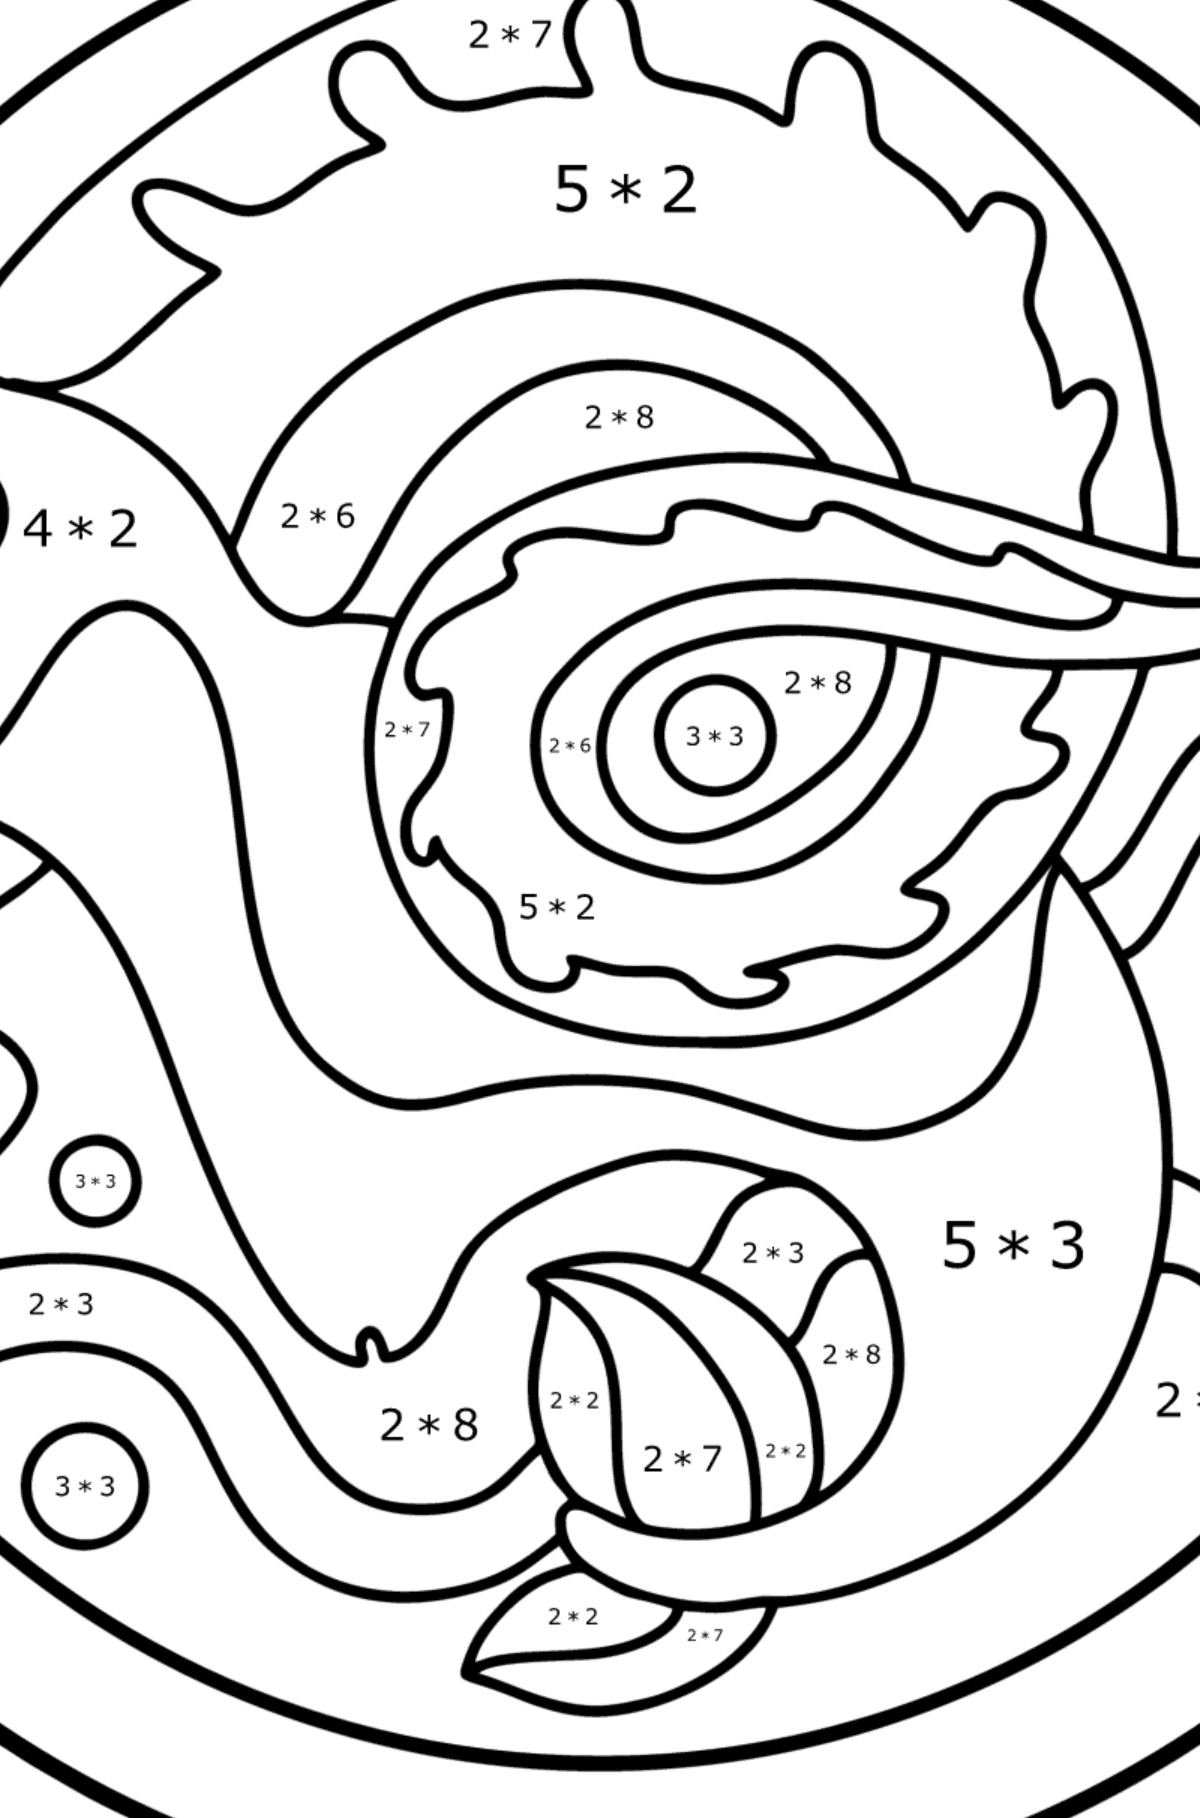 Coloring page for kids - Capricorn zodiac sign - Math Coloring - Multiplication for Kids